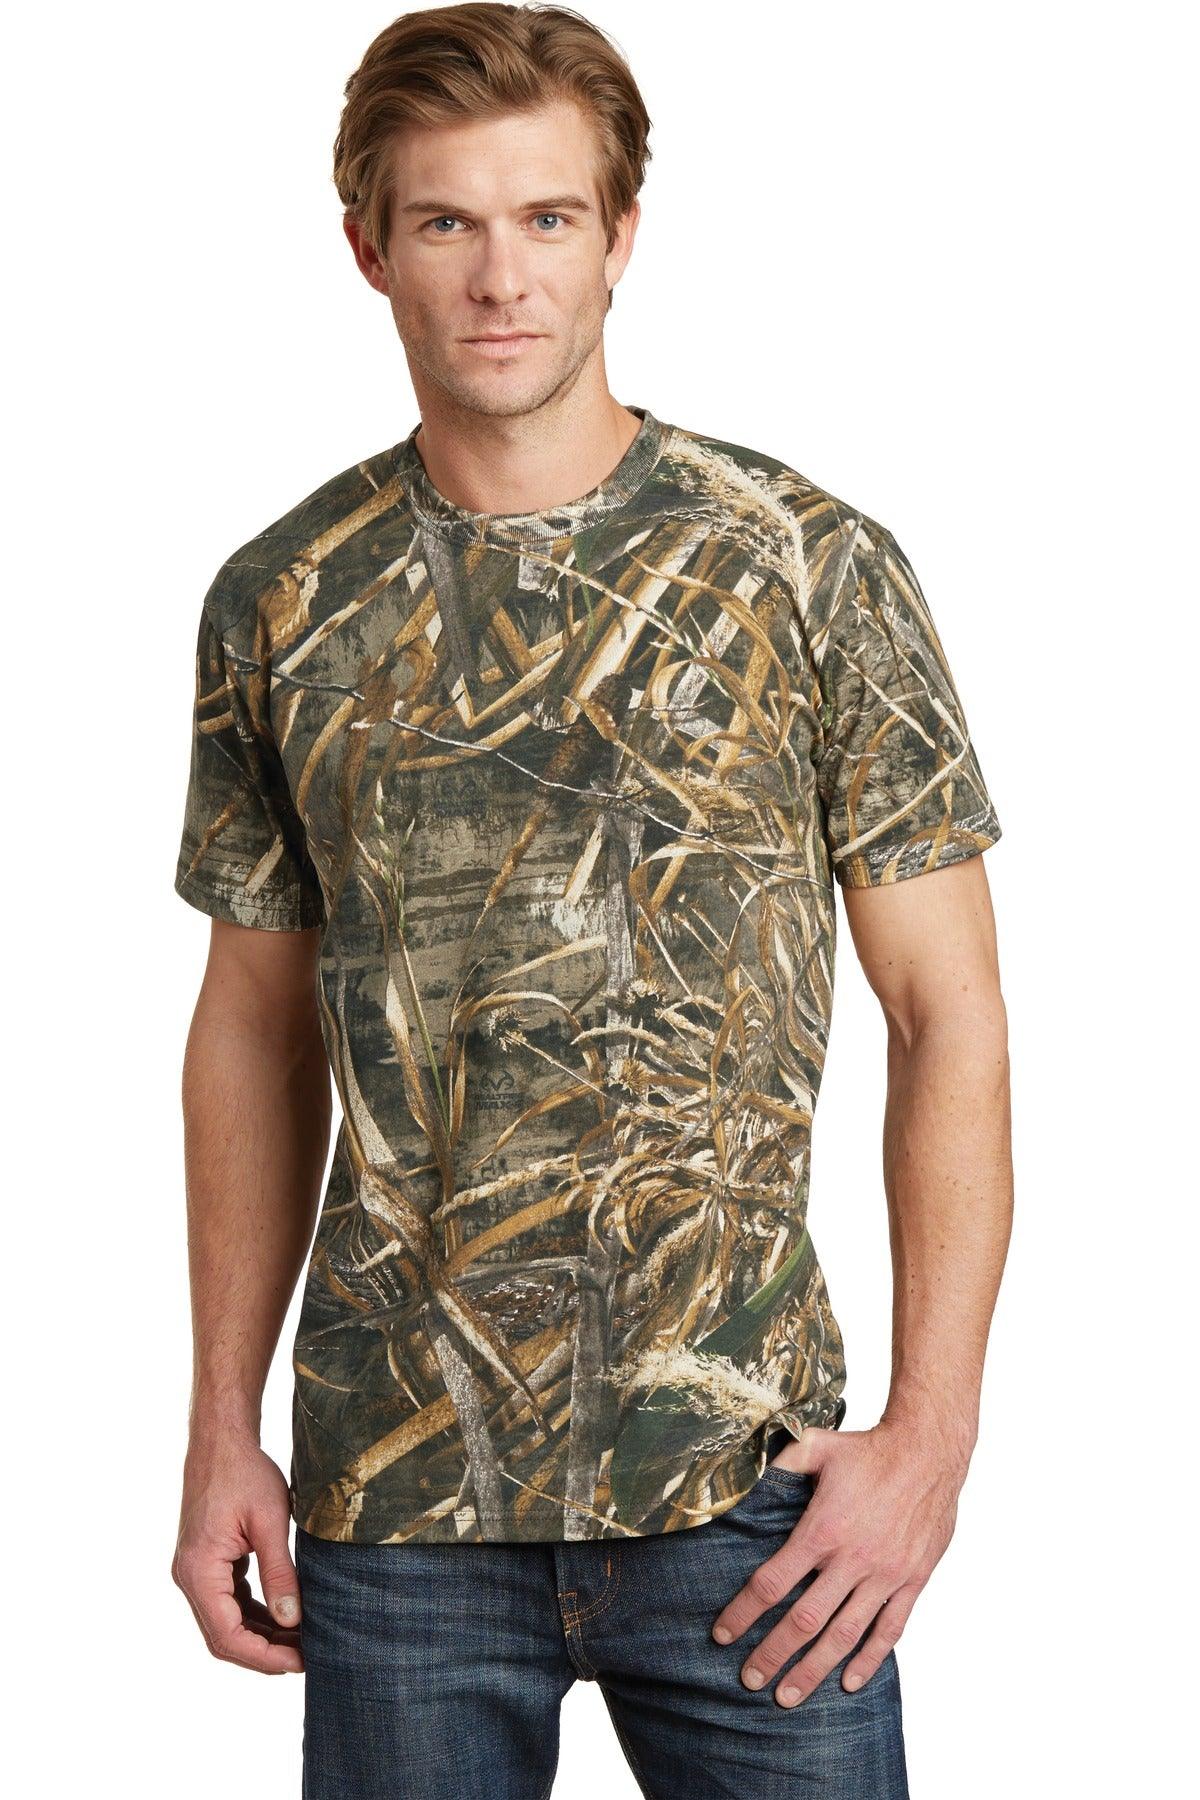 Russell Outdoors - Realtree Explorer 100% Cotton T-Shirt. NP0021R - Dresses Max